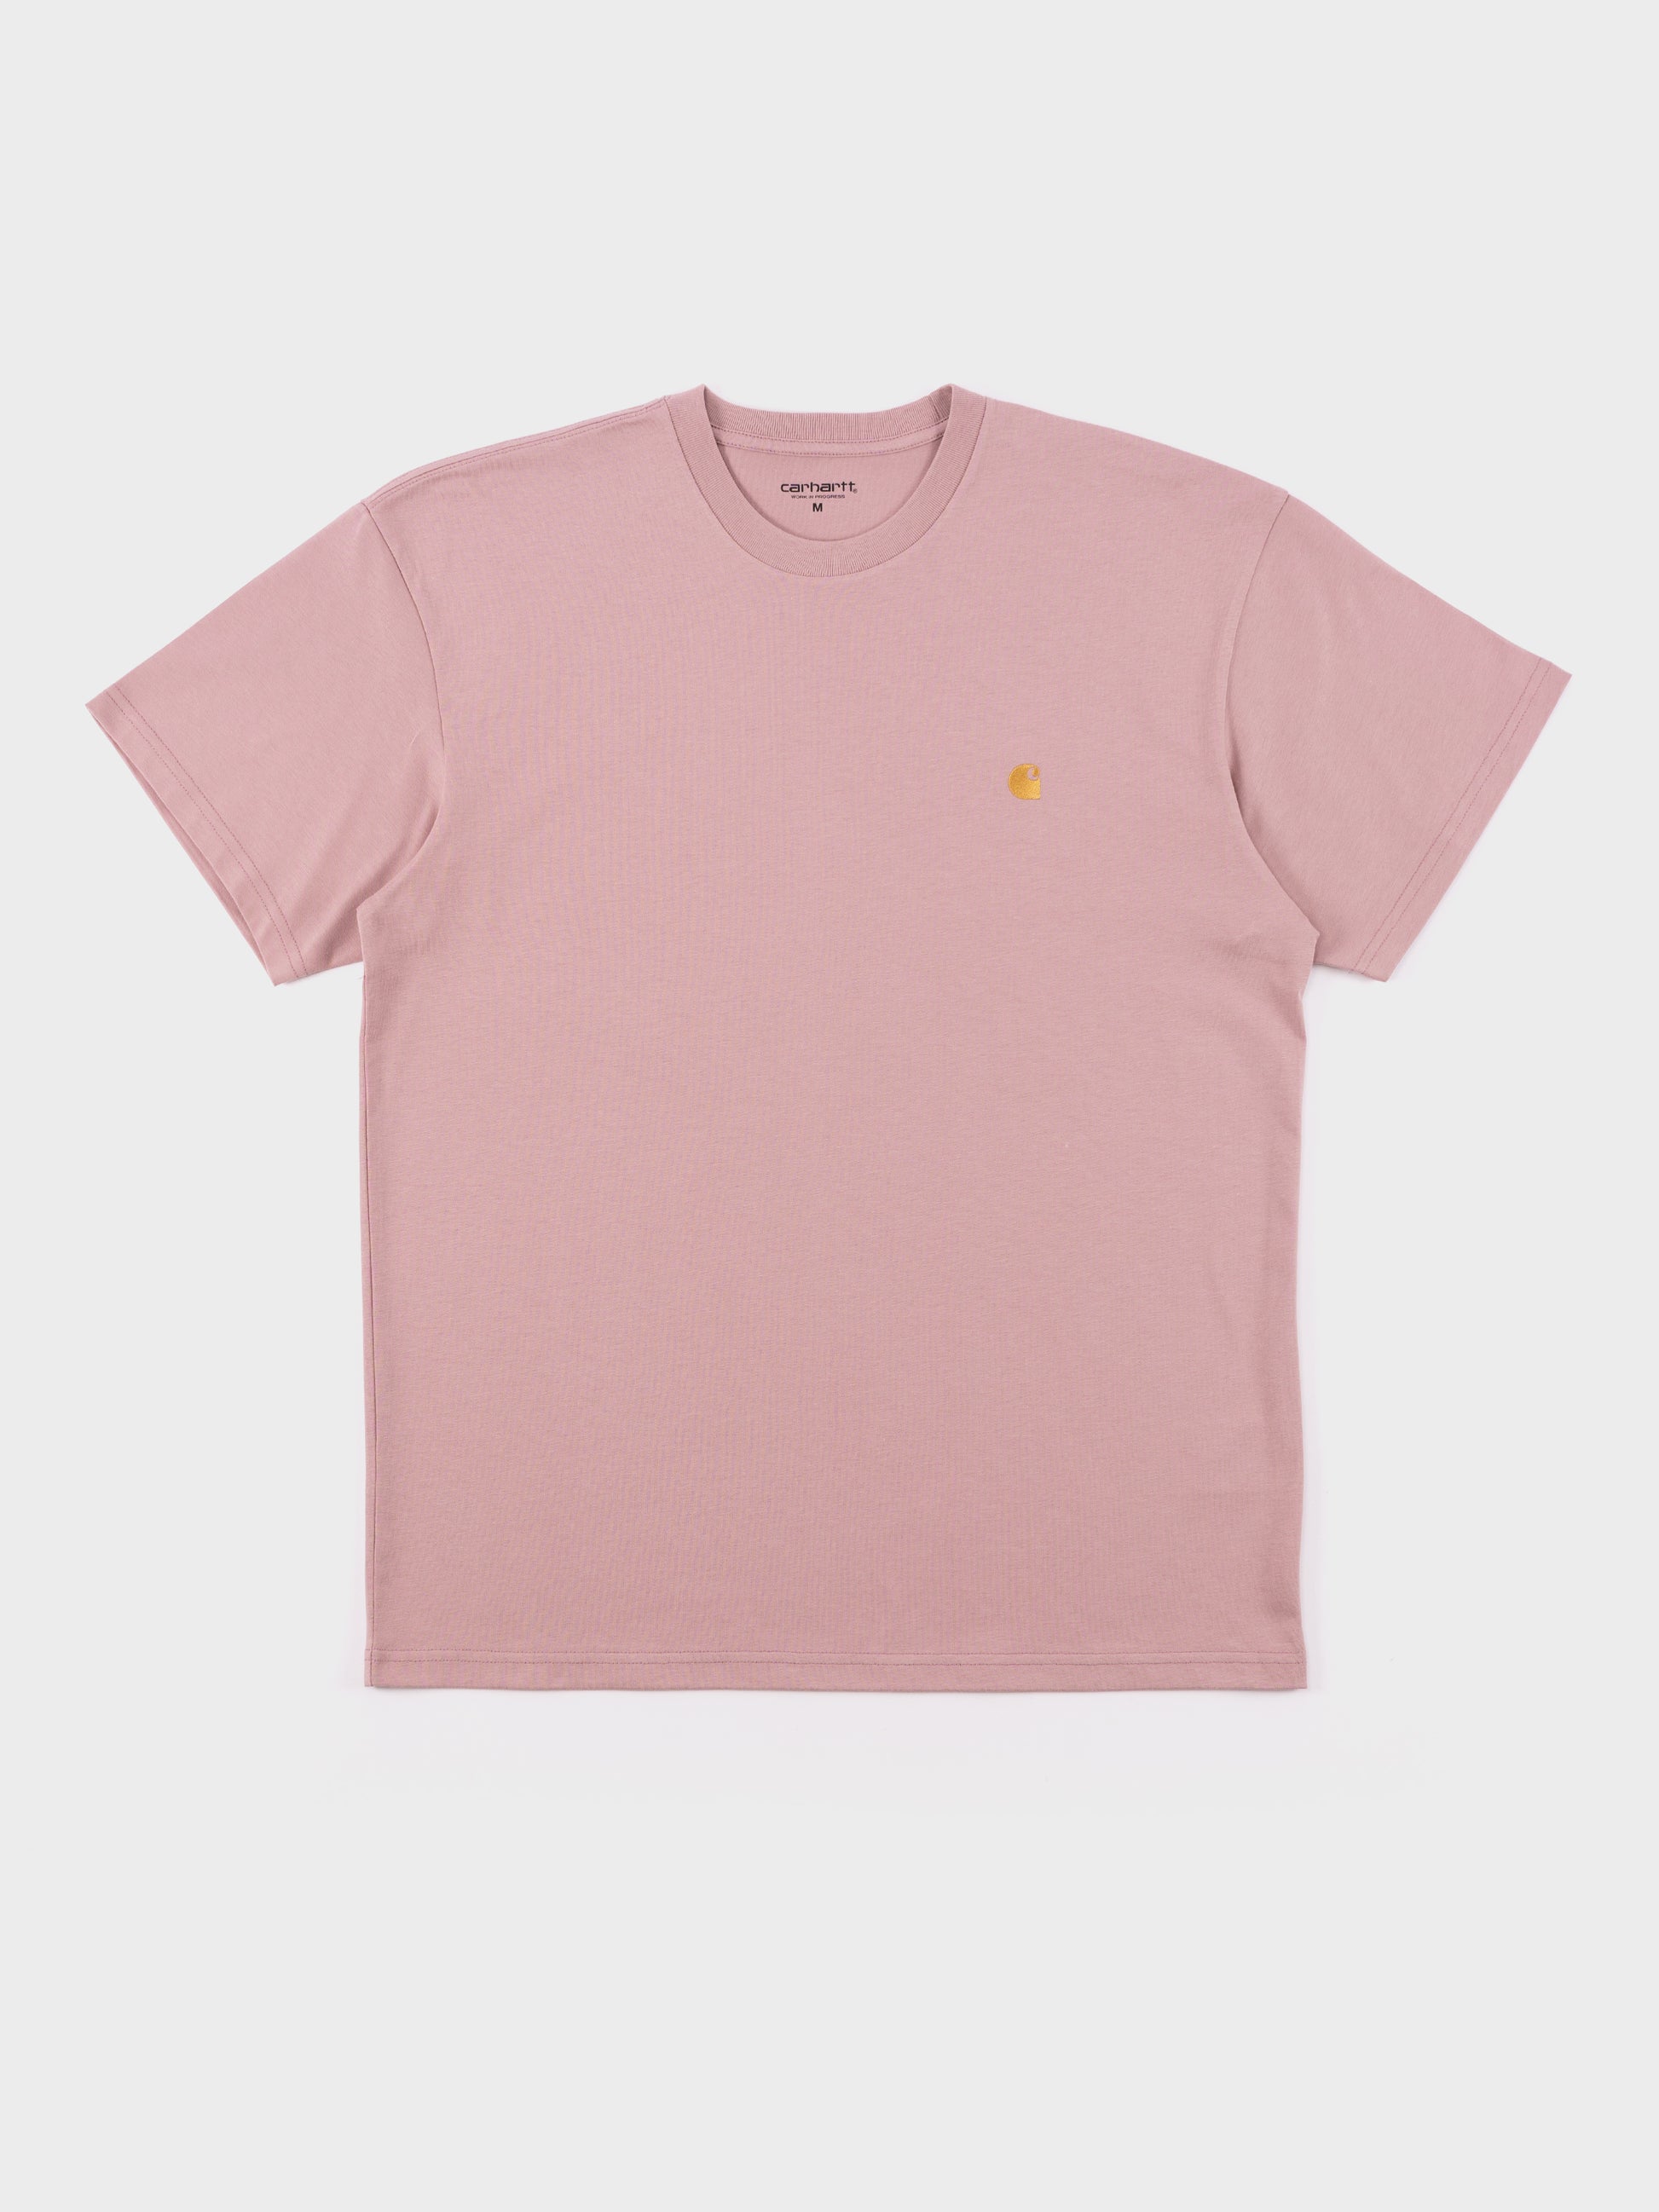 Carhartt SS Chase T Shirt - Glassy Pink/Gold